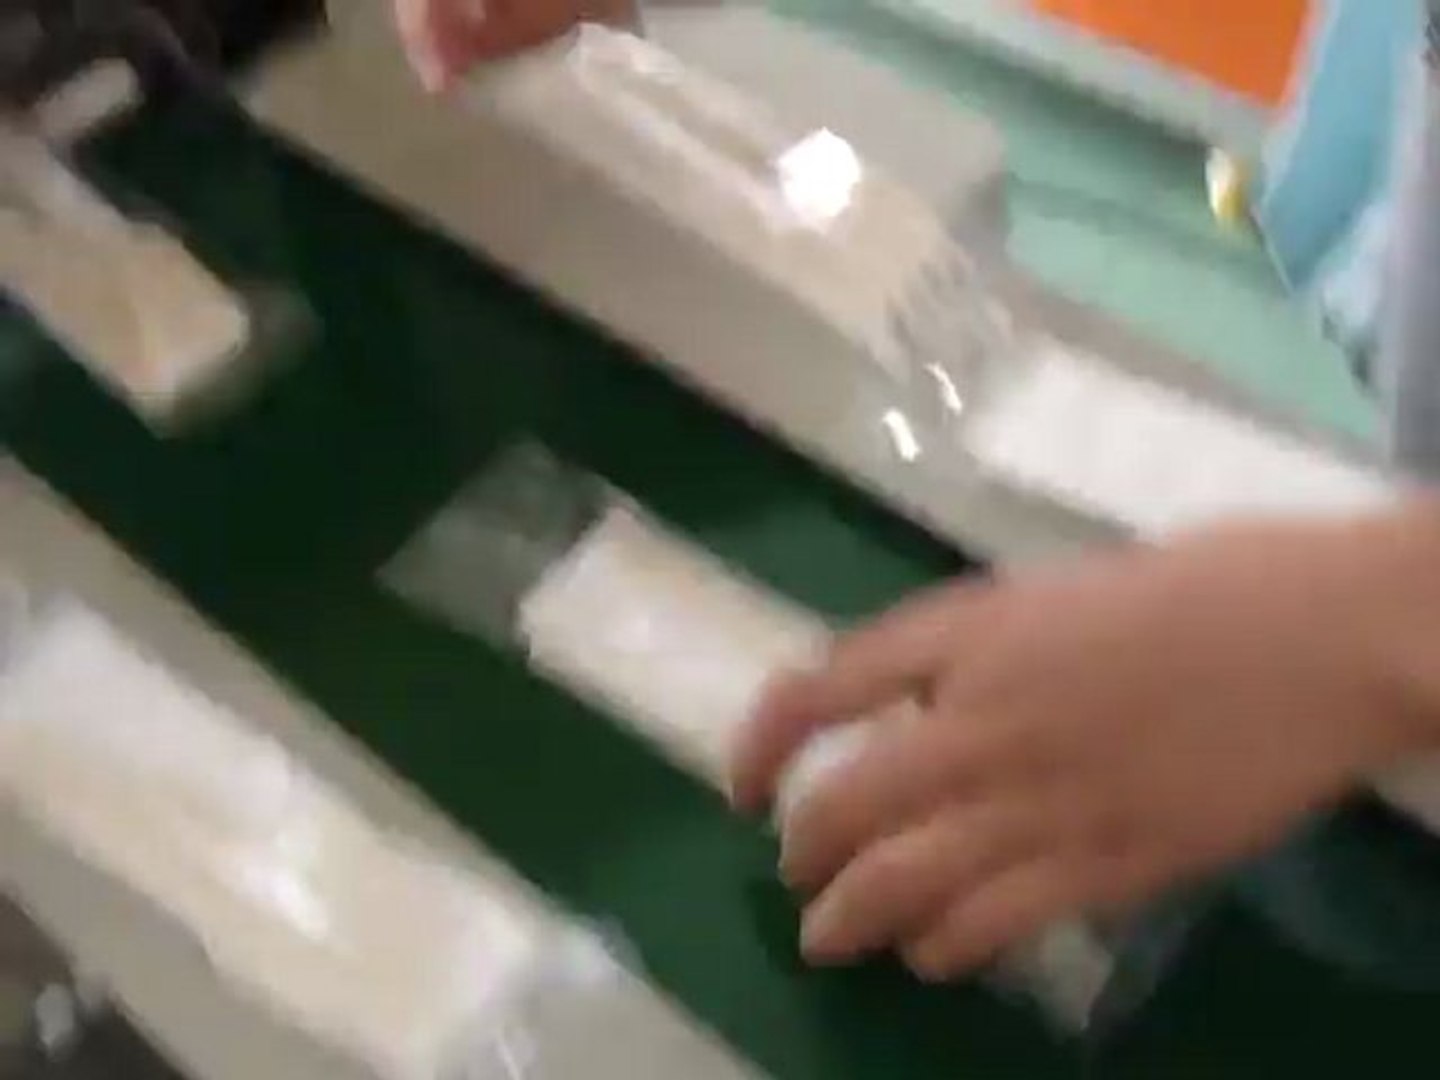 automatic silverware wrapping machine - video Dailymotion